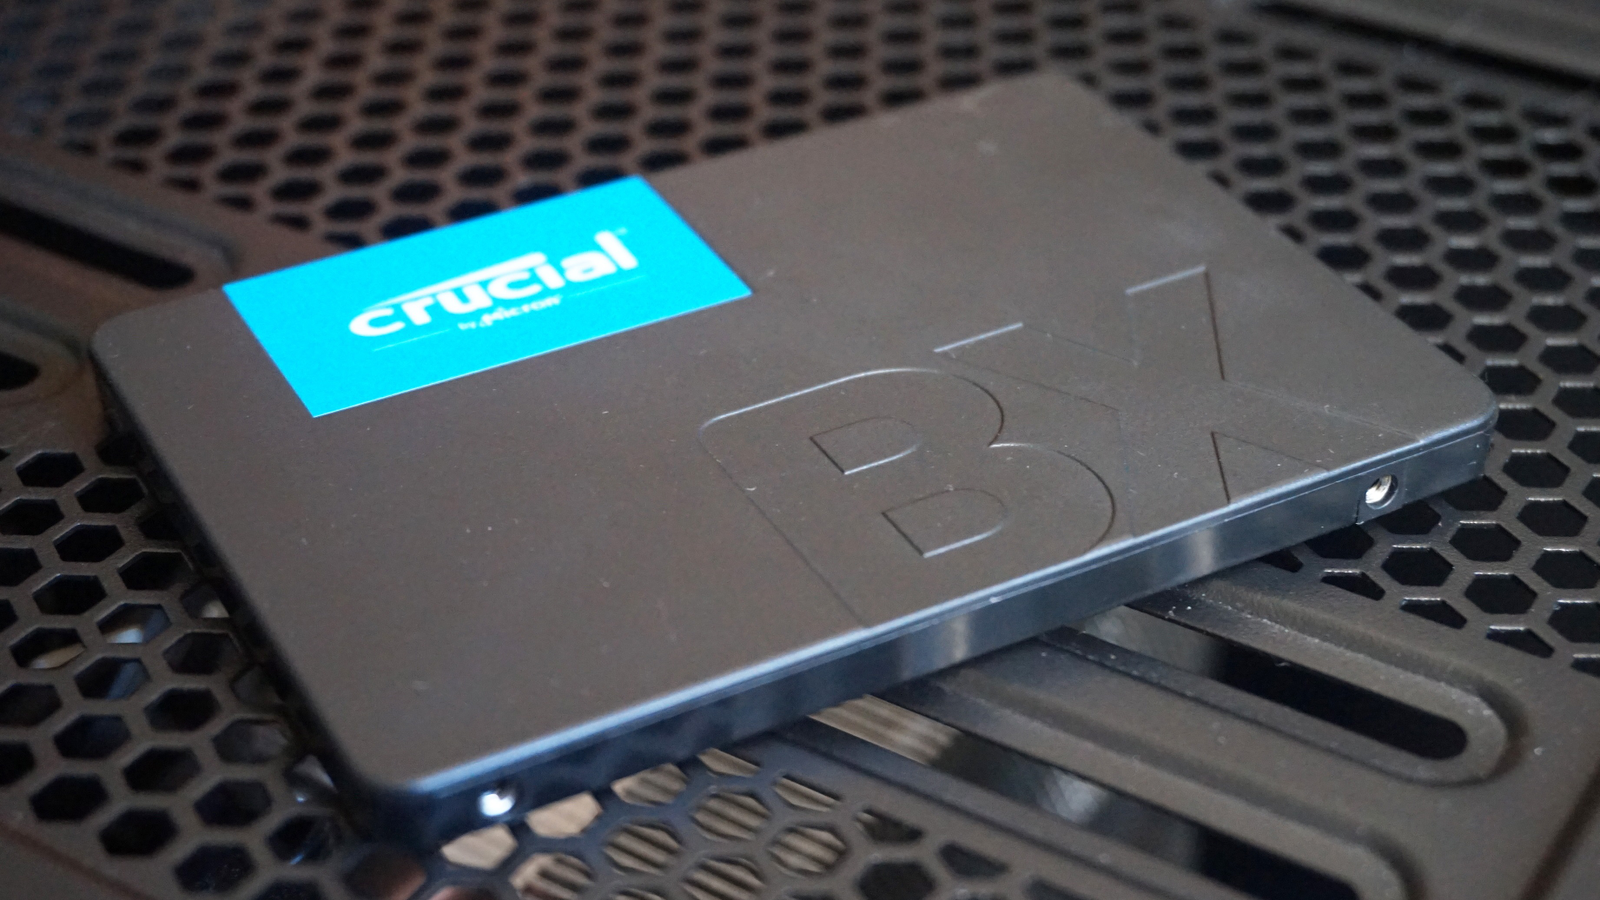 Crucial BX500 review: A great value gaming SSD